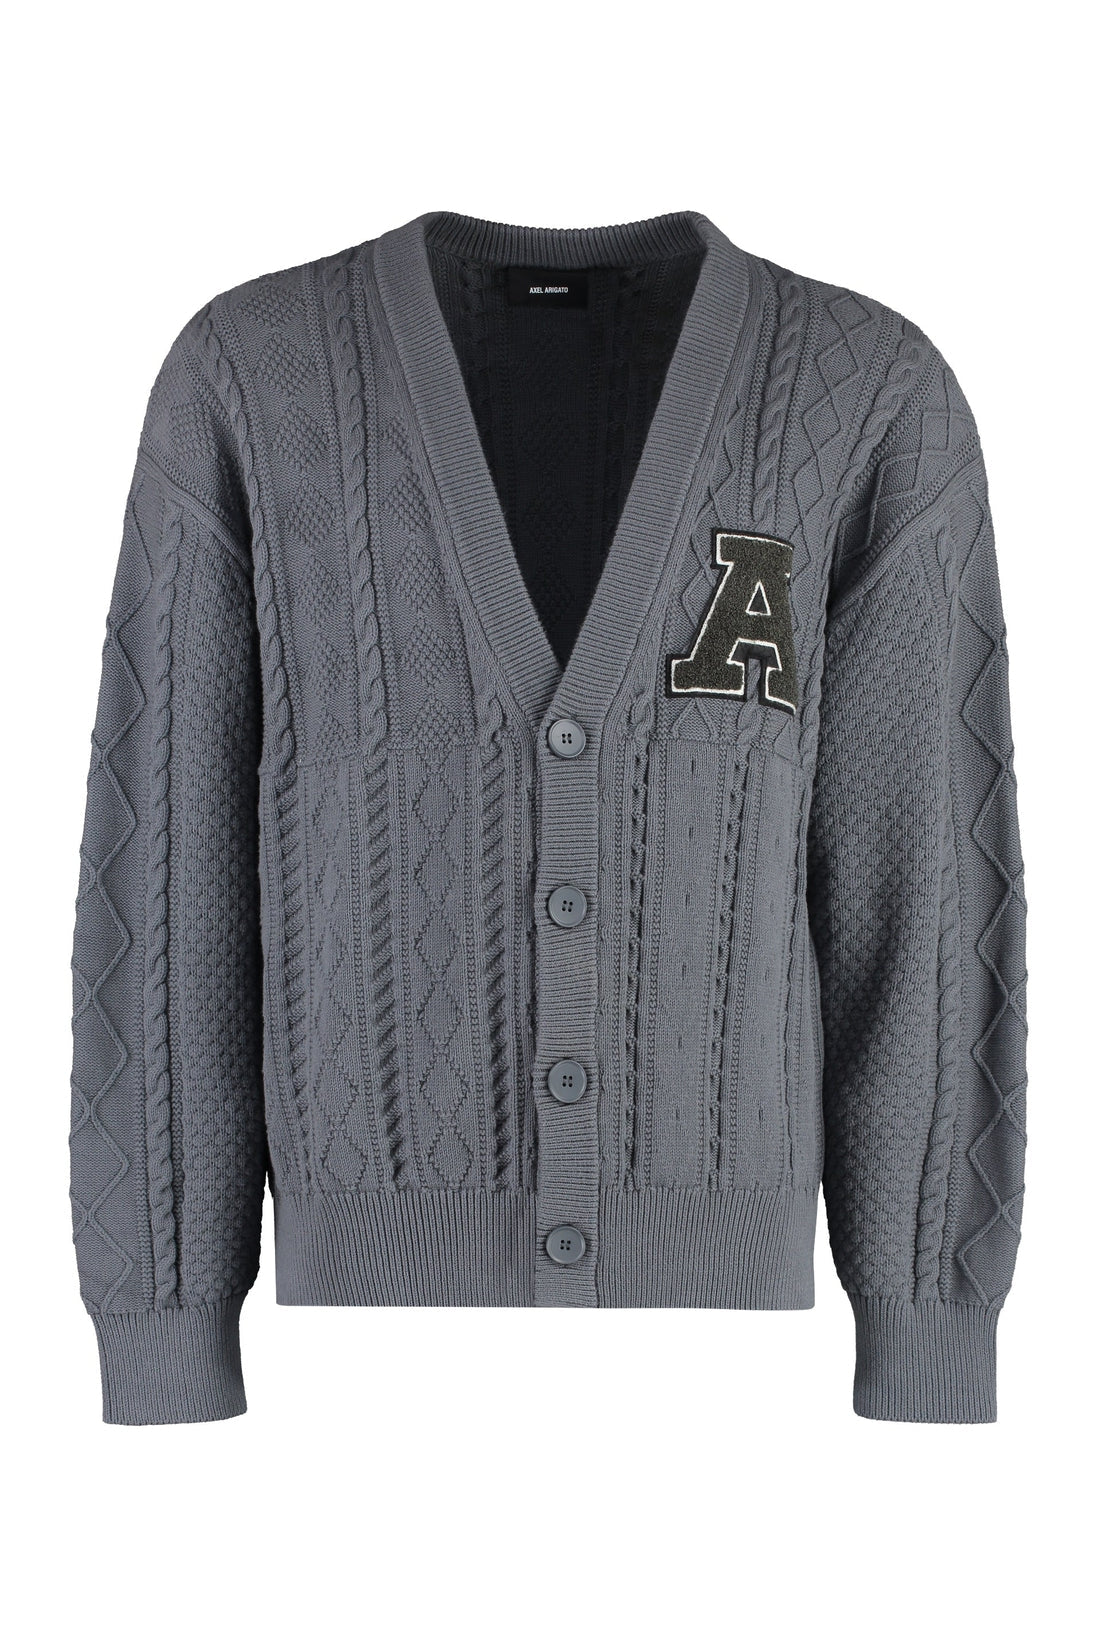 Axel Arigato-OUTLET-SALE-Cable knit cardigan-ARCHIVIST